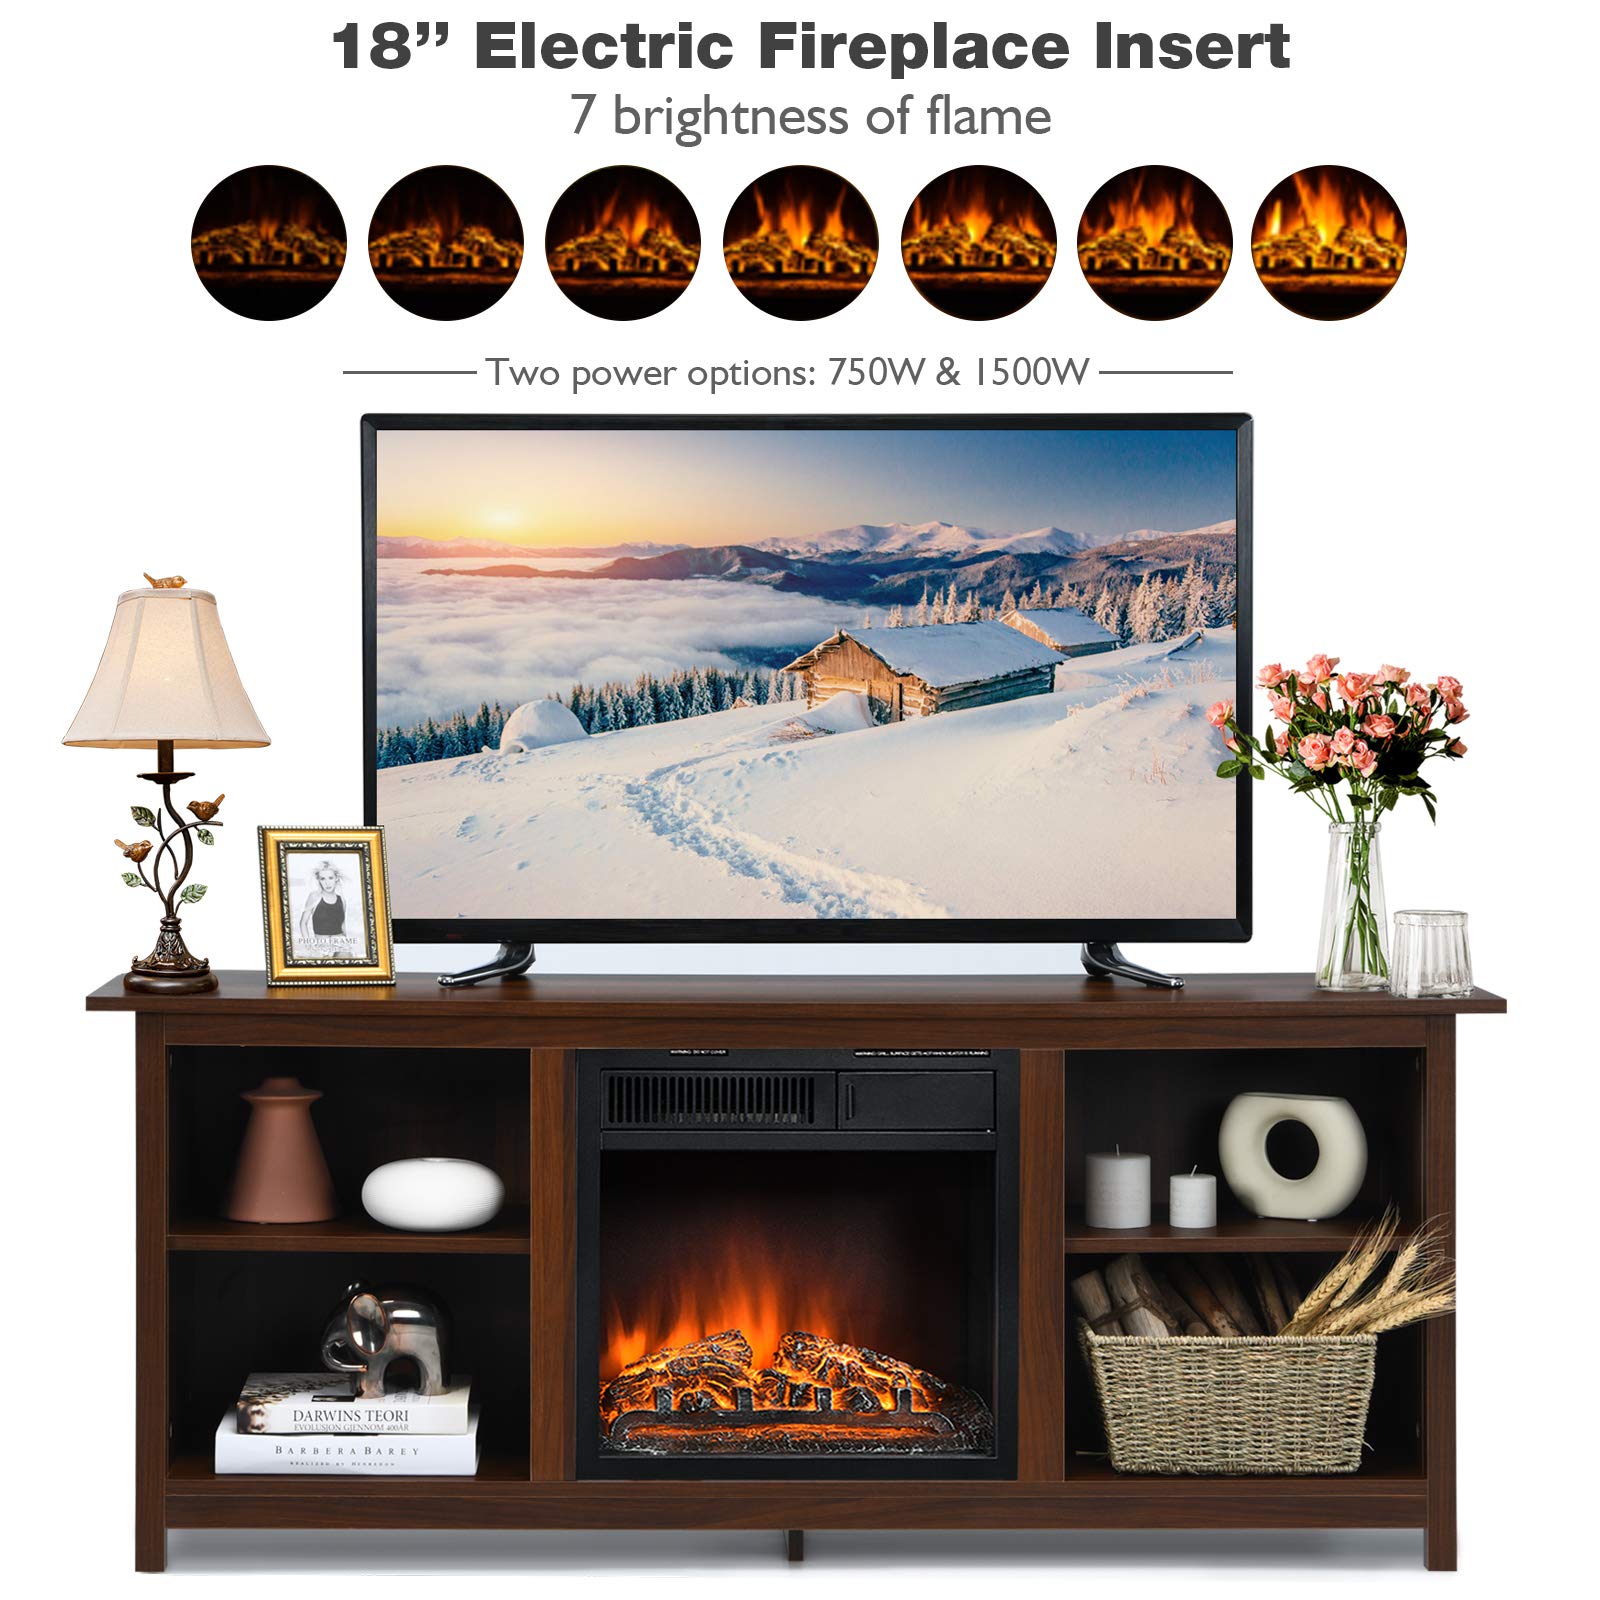 Tangkula Fireplace TV Stand, 58 Inches Entertainment Media Console Center w/18 Inches 1500W Electric Fireplace, w/Remote Control and Adjustable Brightness, TV Stand Fireplace for TV Up to 65 Inches